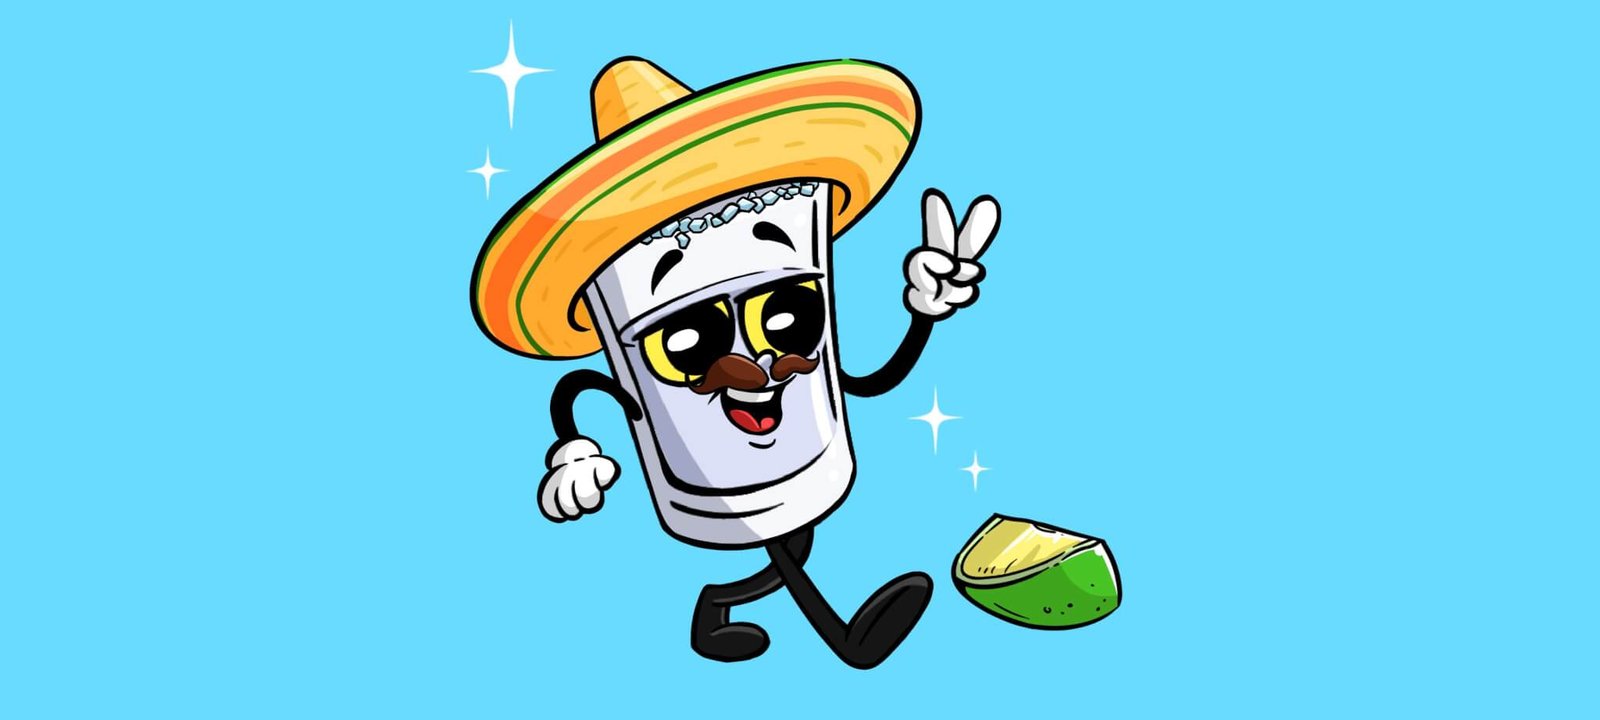 Tequila (JULIO), the new SOL meme coin launching next week